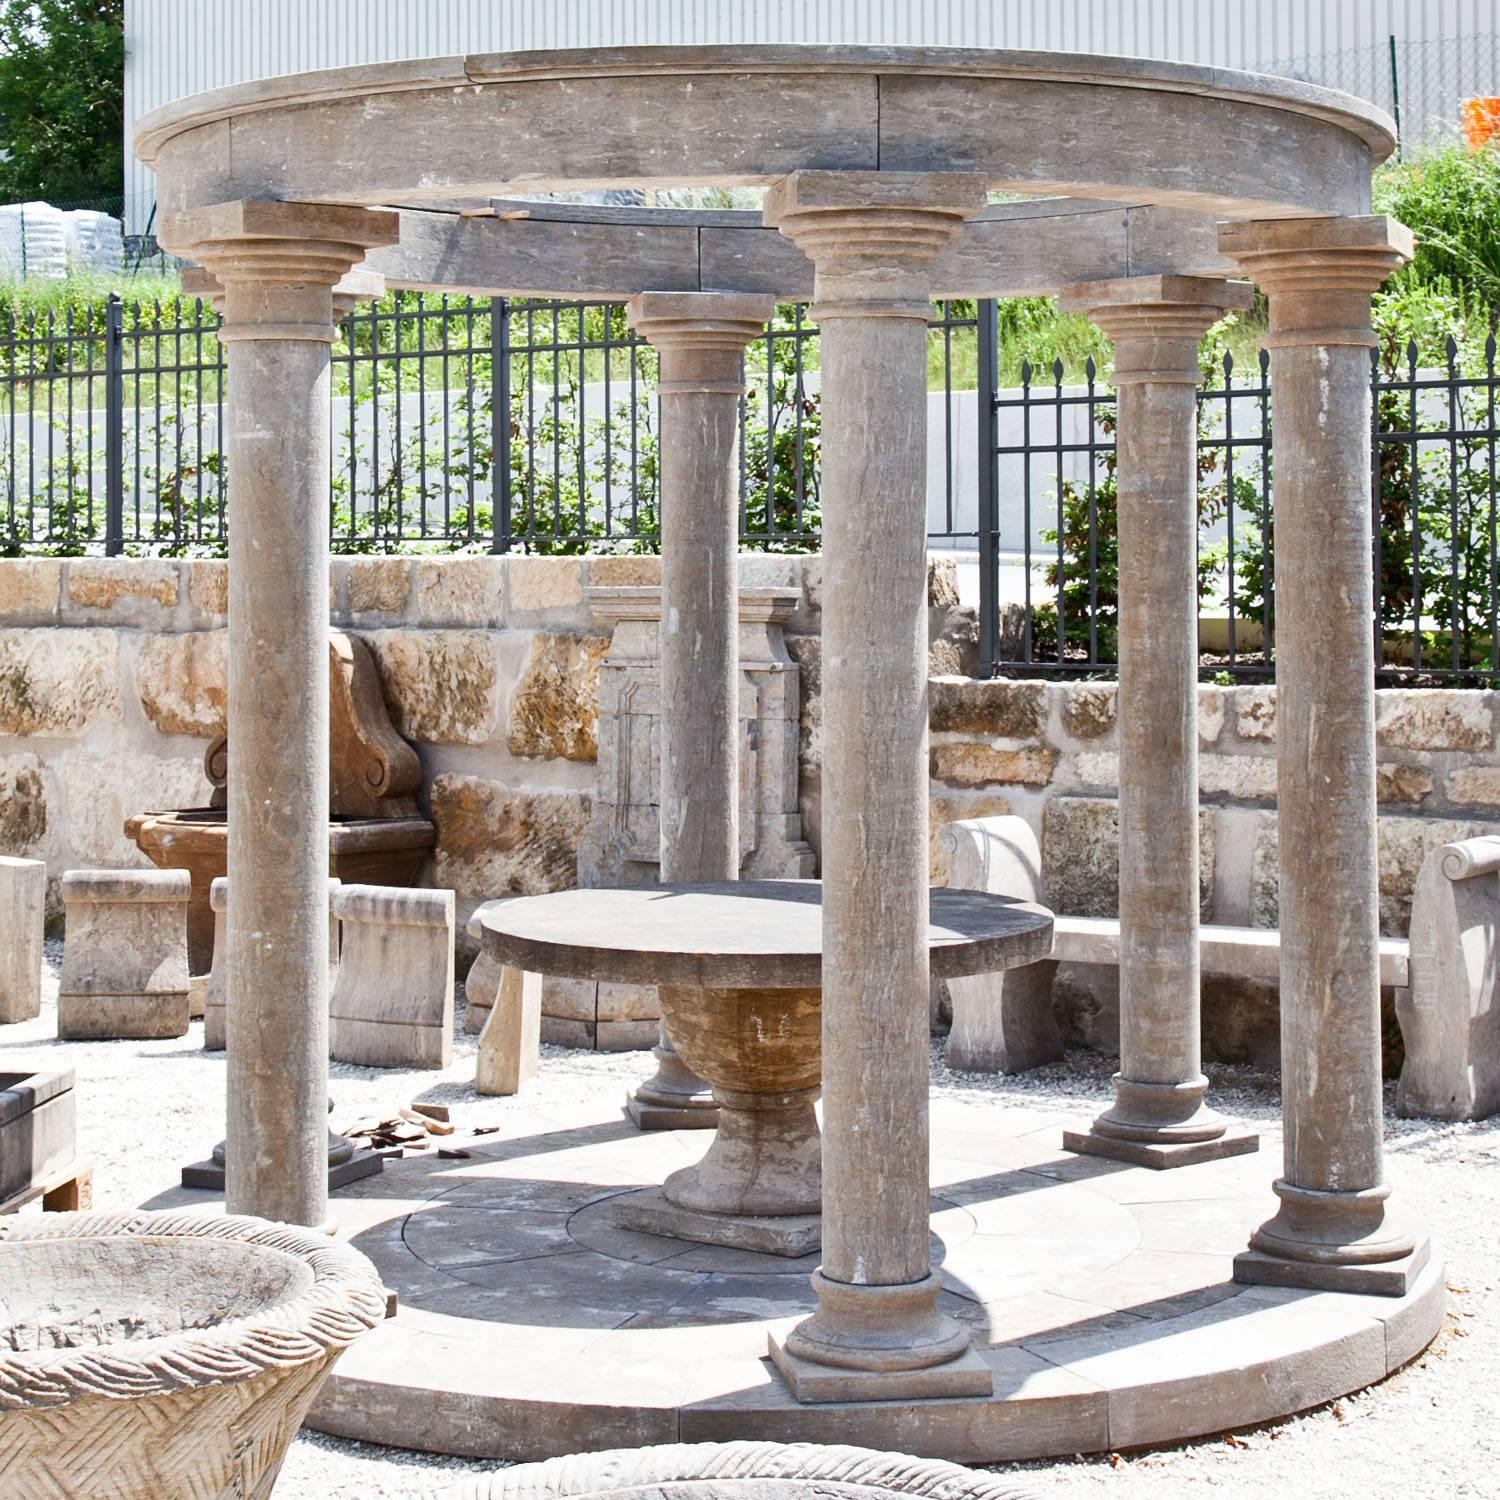 Large round pavilion with six smooth columns and a straight architrave in the style of a classical Monopteros.